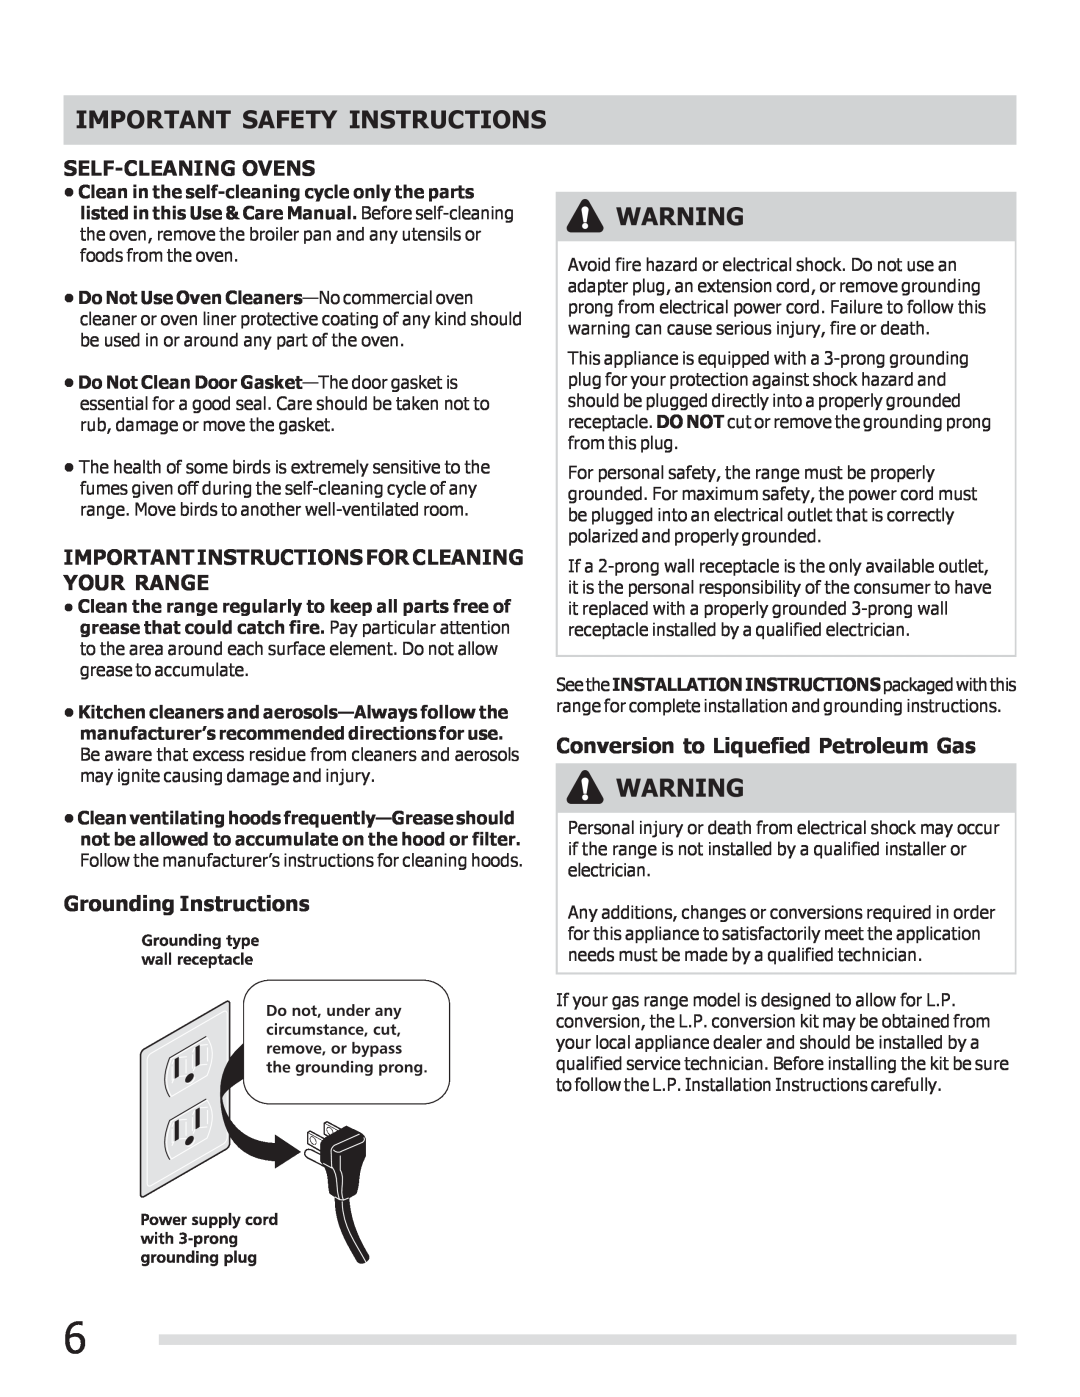 Frigidaire 316901309 Self-Cleaningovens, Important Instructions For Cleaning Your Range, Grounding Instructions 